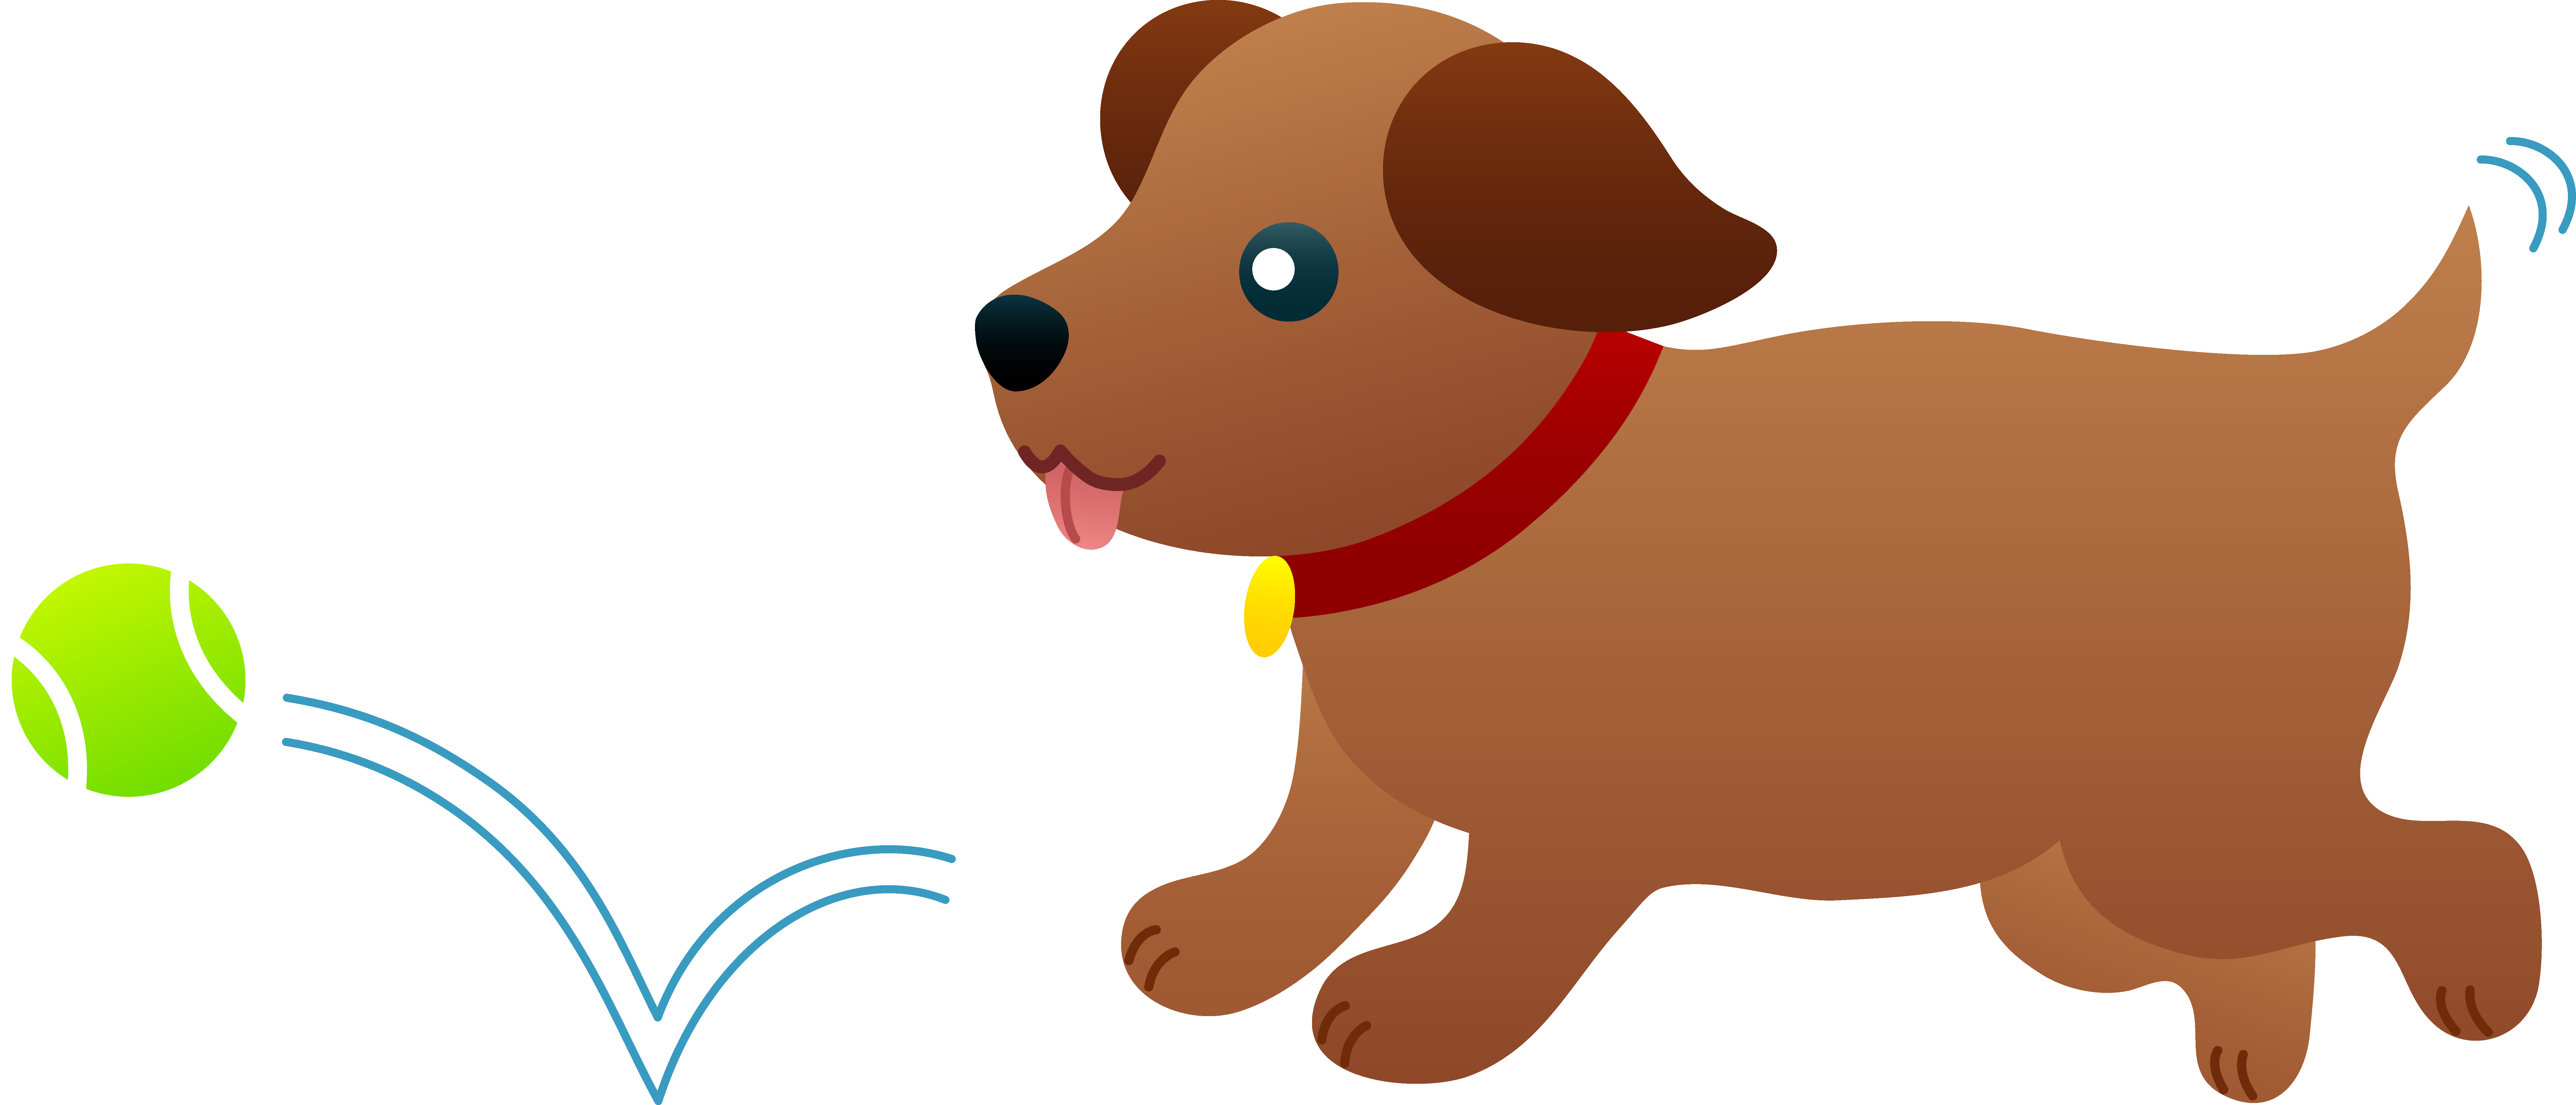 free dog clipart downloads - photo #41